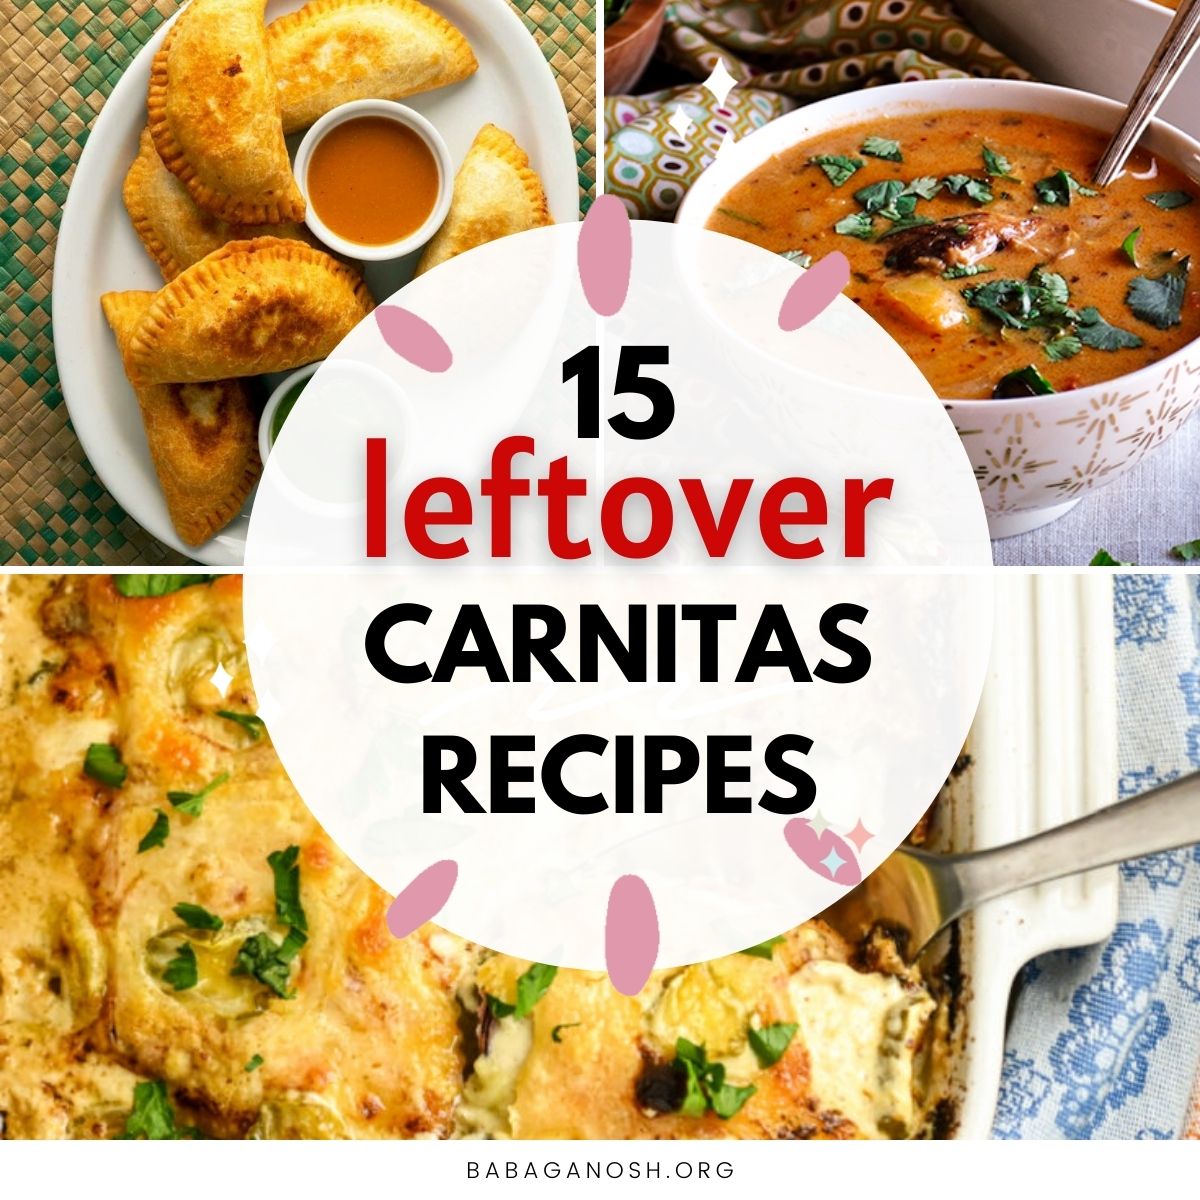 Graphic with text: 15 Leftover Carnitas Recipes